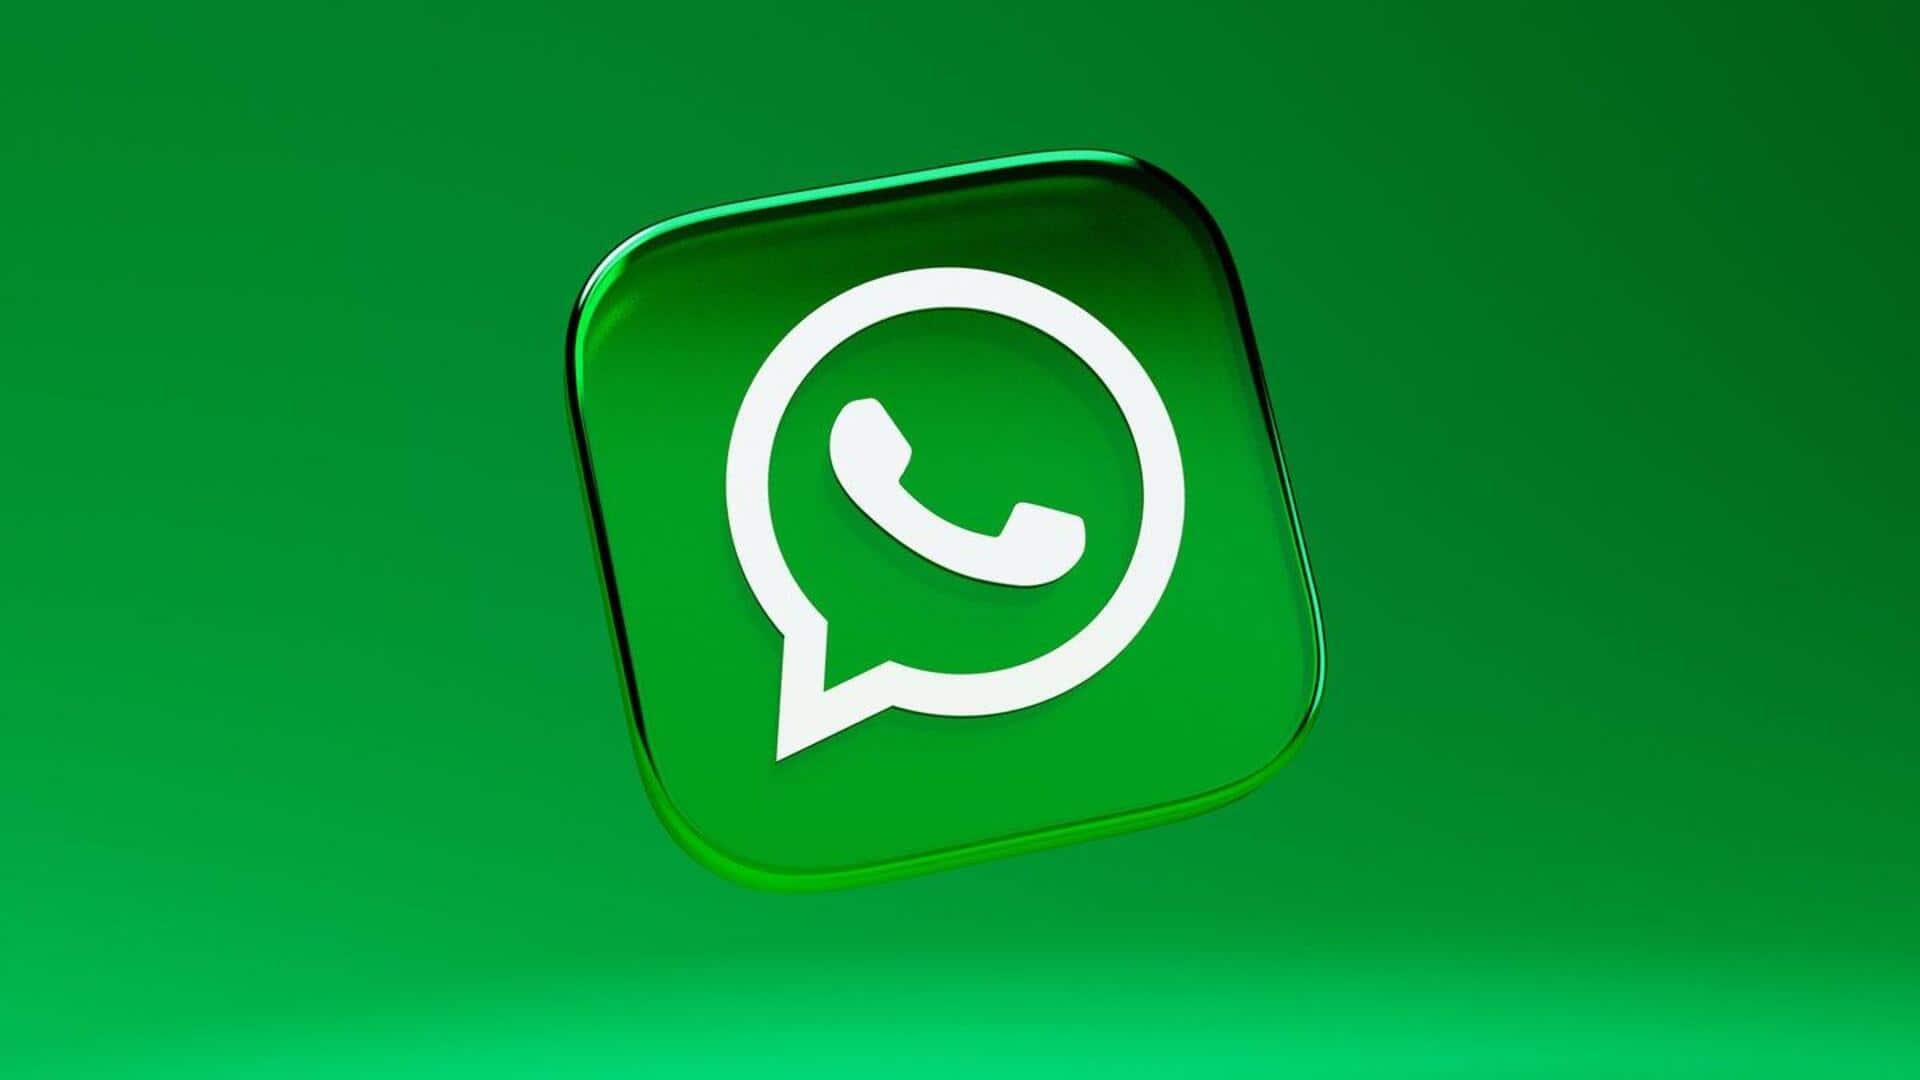 WhatsApp introduces new banner to increase user engagement on platform